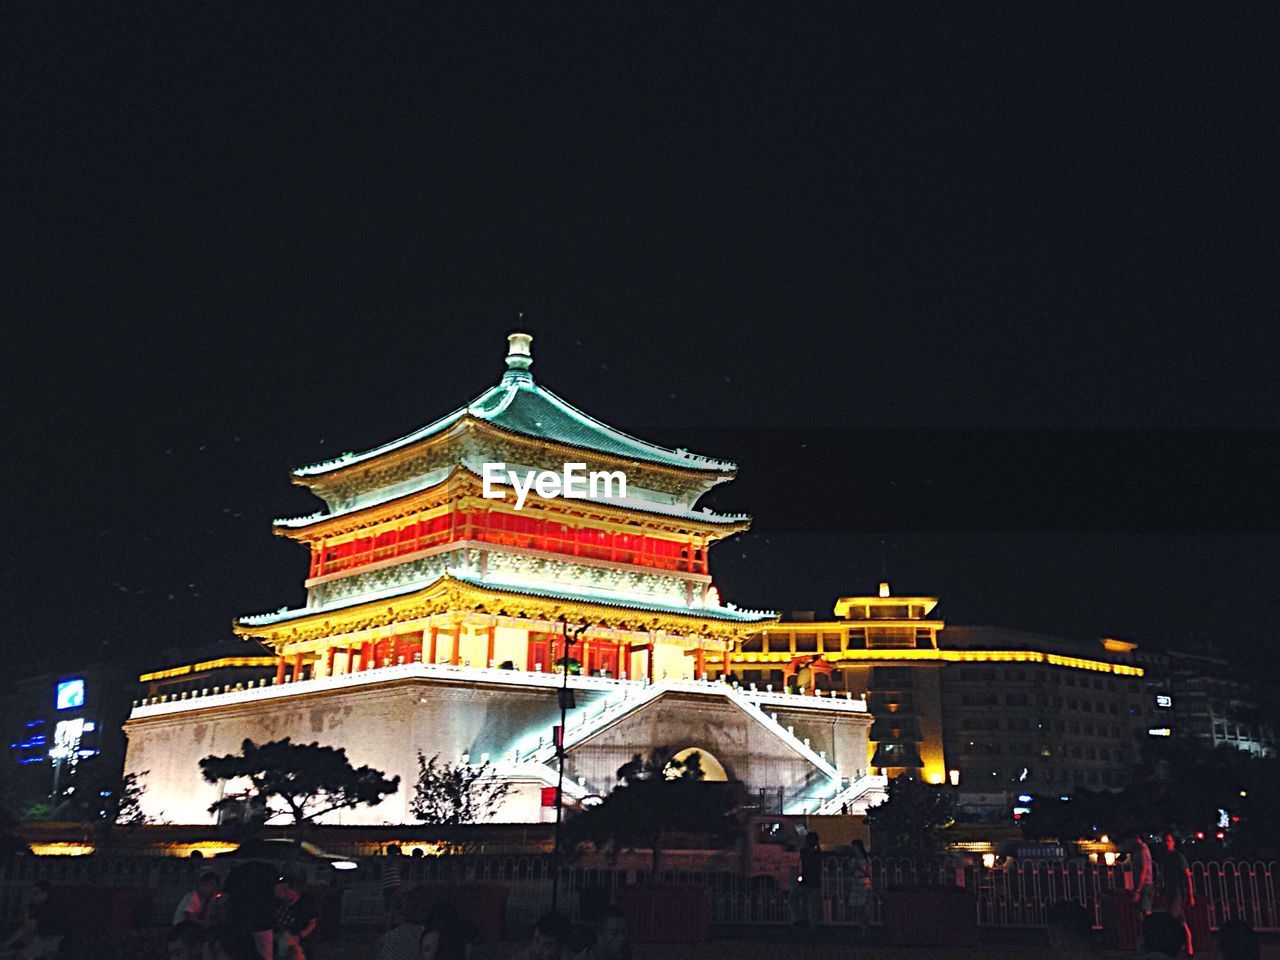 LOW ANGLE VIEW OF ILLUMINATED BUILDING AT NIGHT